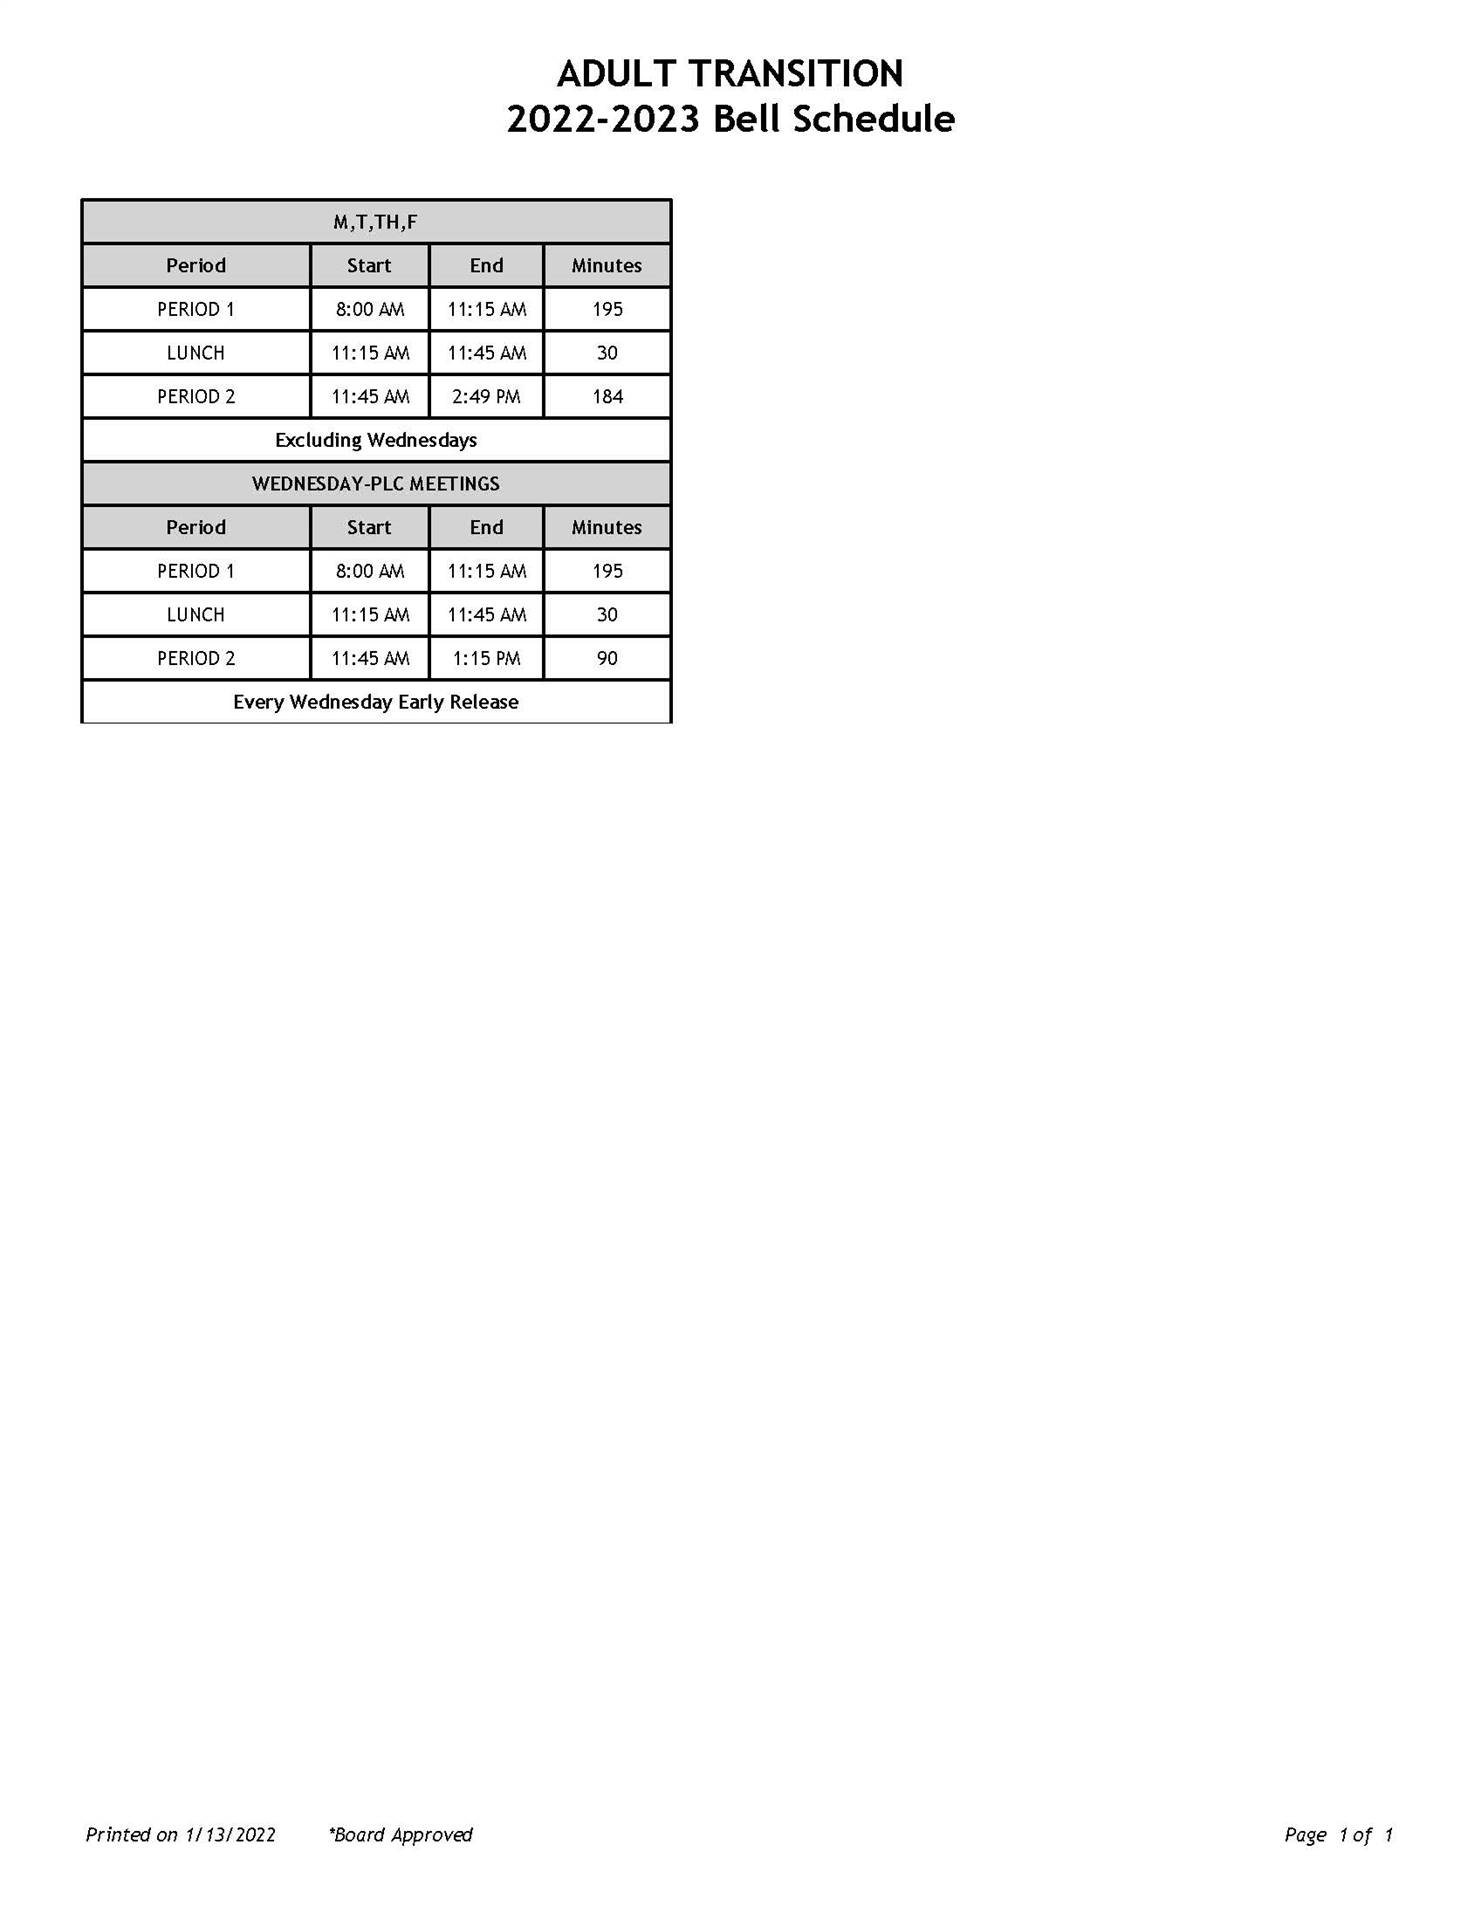 Ed Services Area Bell Schedule - full text downloadable below